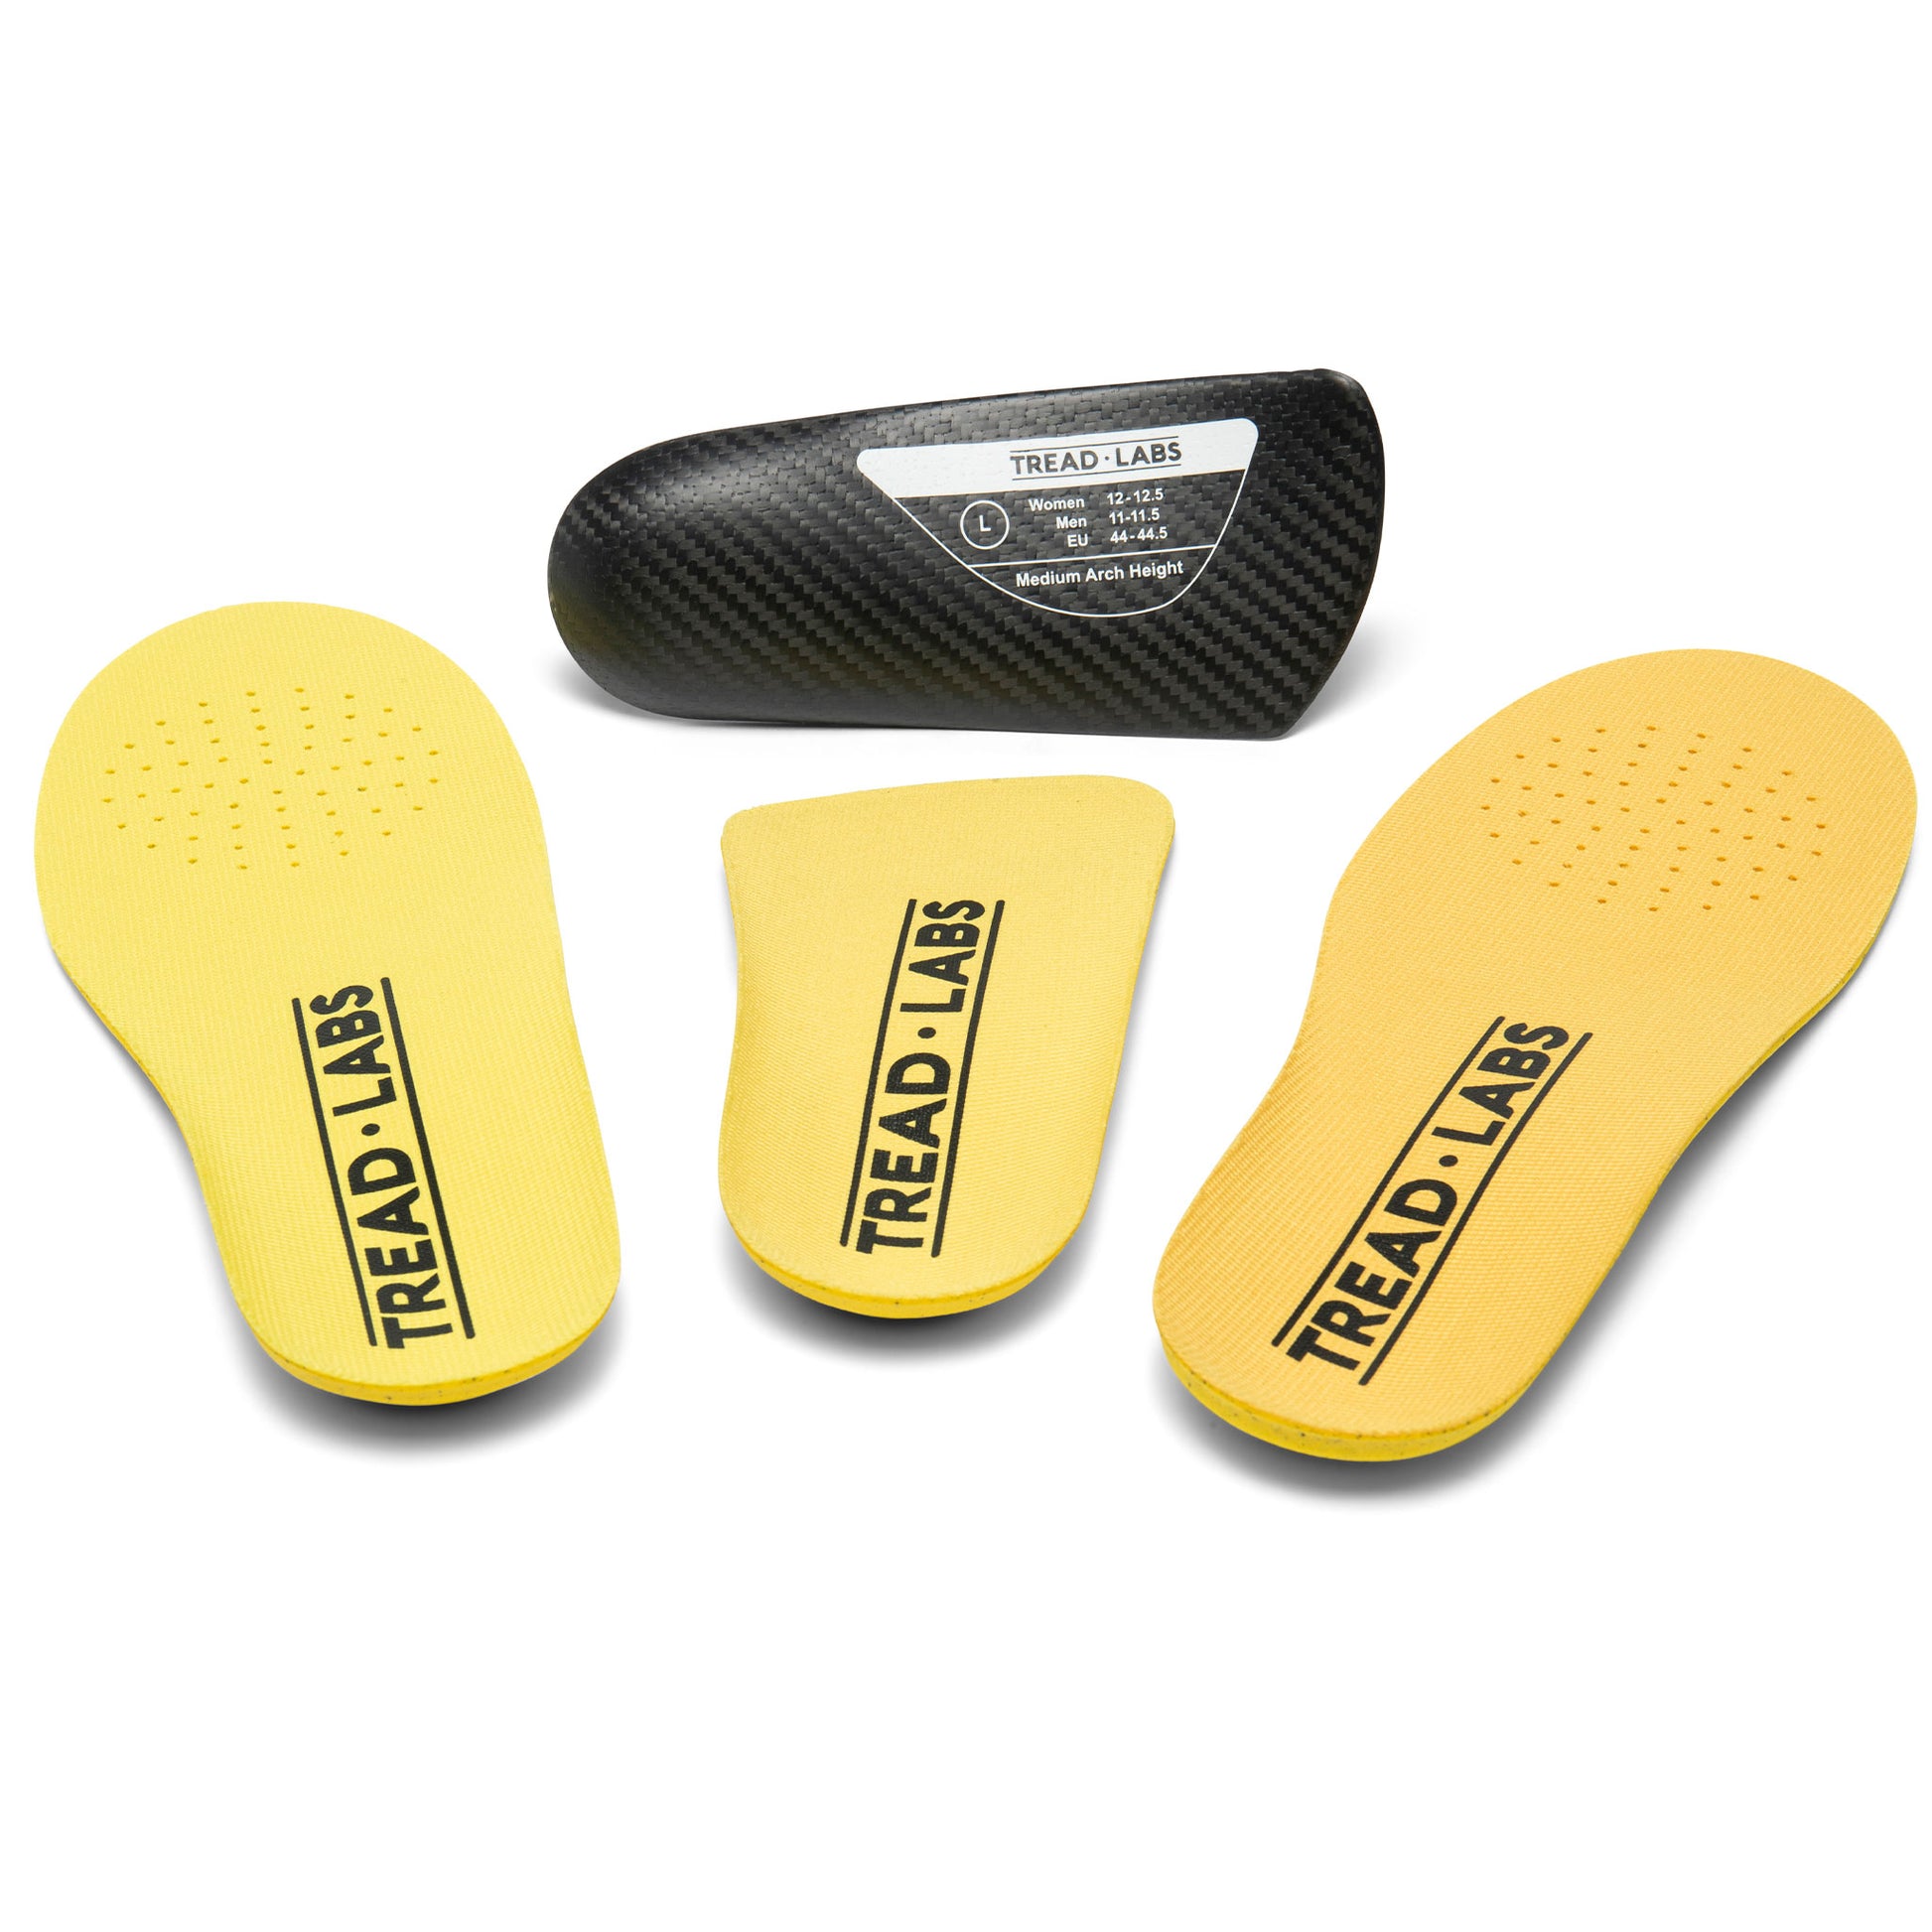 Dash Insole Kit orthotics for feet by Tread Labs